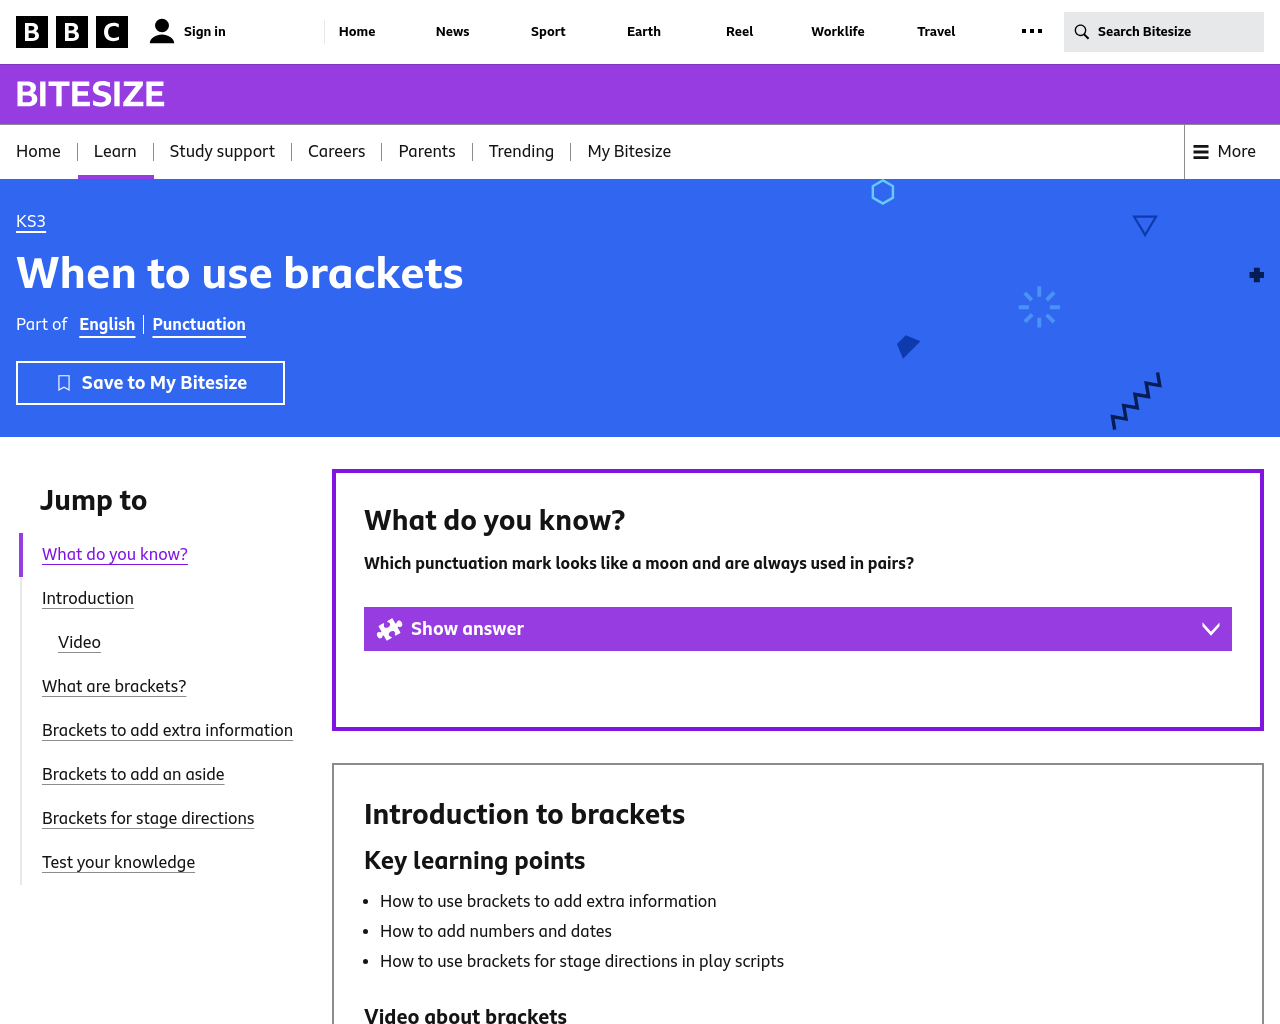 When to use brackets